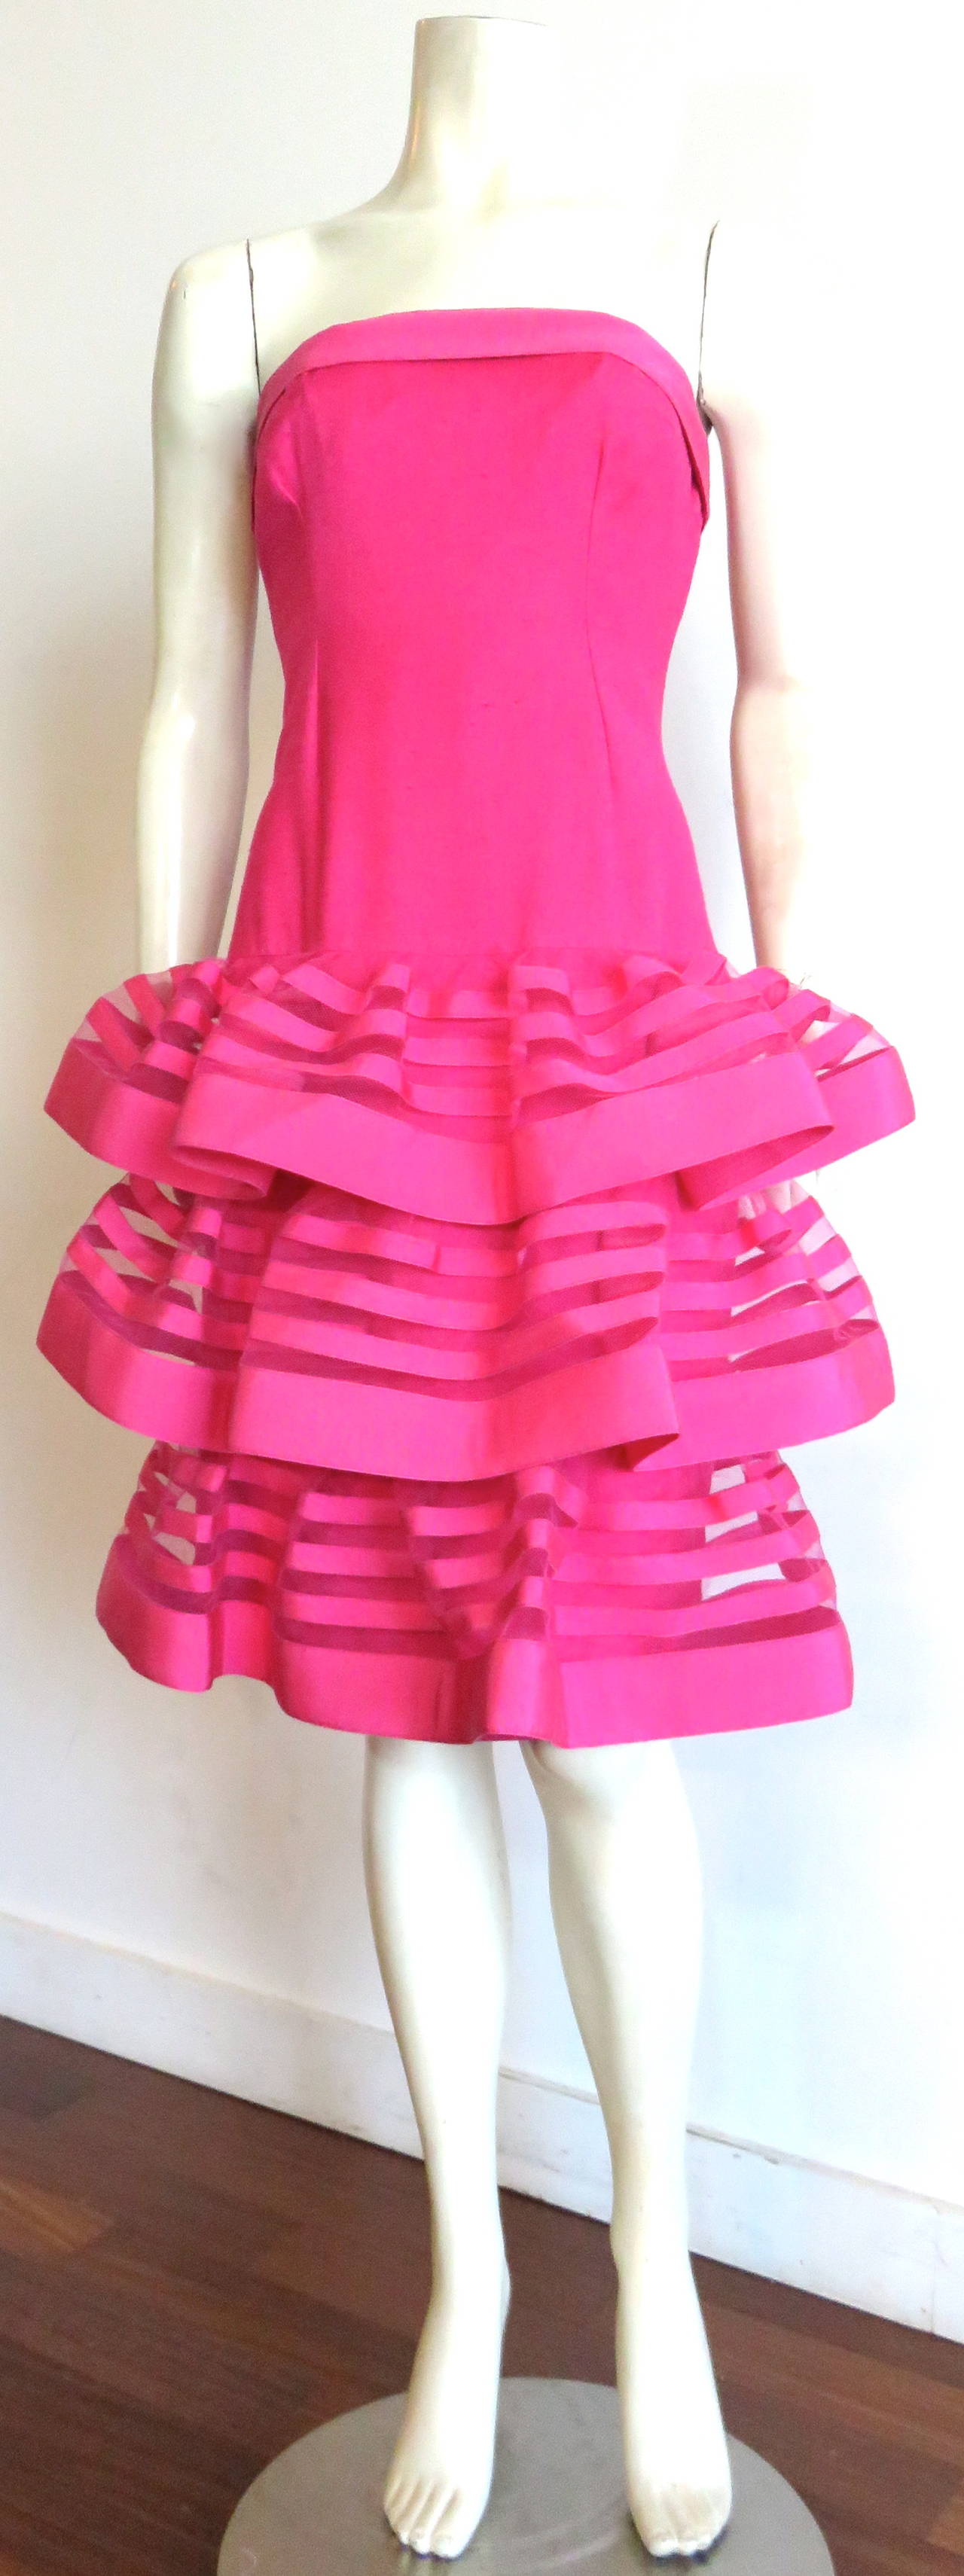 Late 1970's, NINA RICCI PARIS hot pink, tiered party dress.

The base of the dress is made of natural, Shantung-style, silk/woolen base fabric.  The triple bottom tiers are made of matching, sheer, mesh netting with solid, grosgrain ribbon